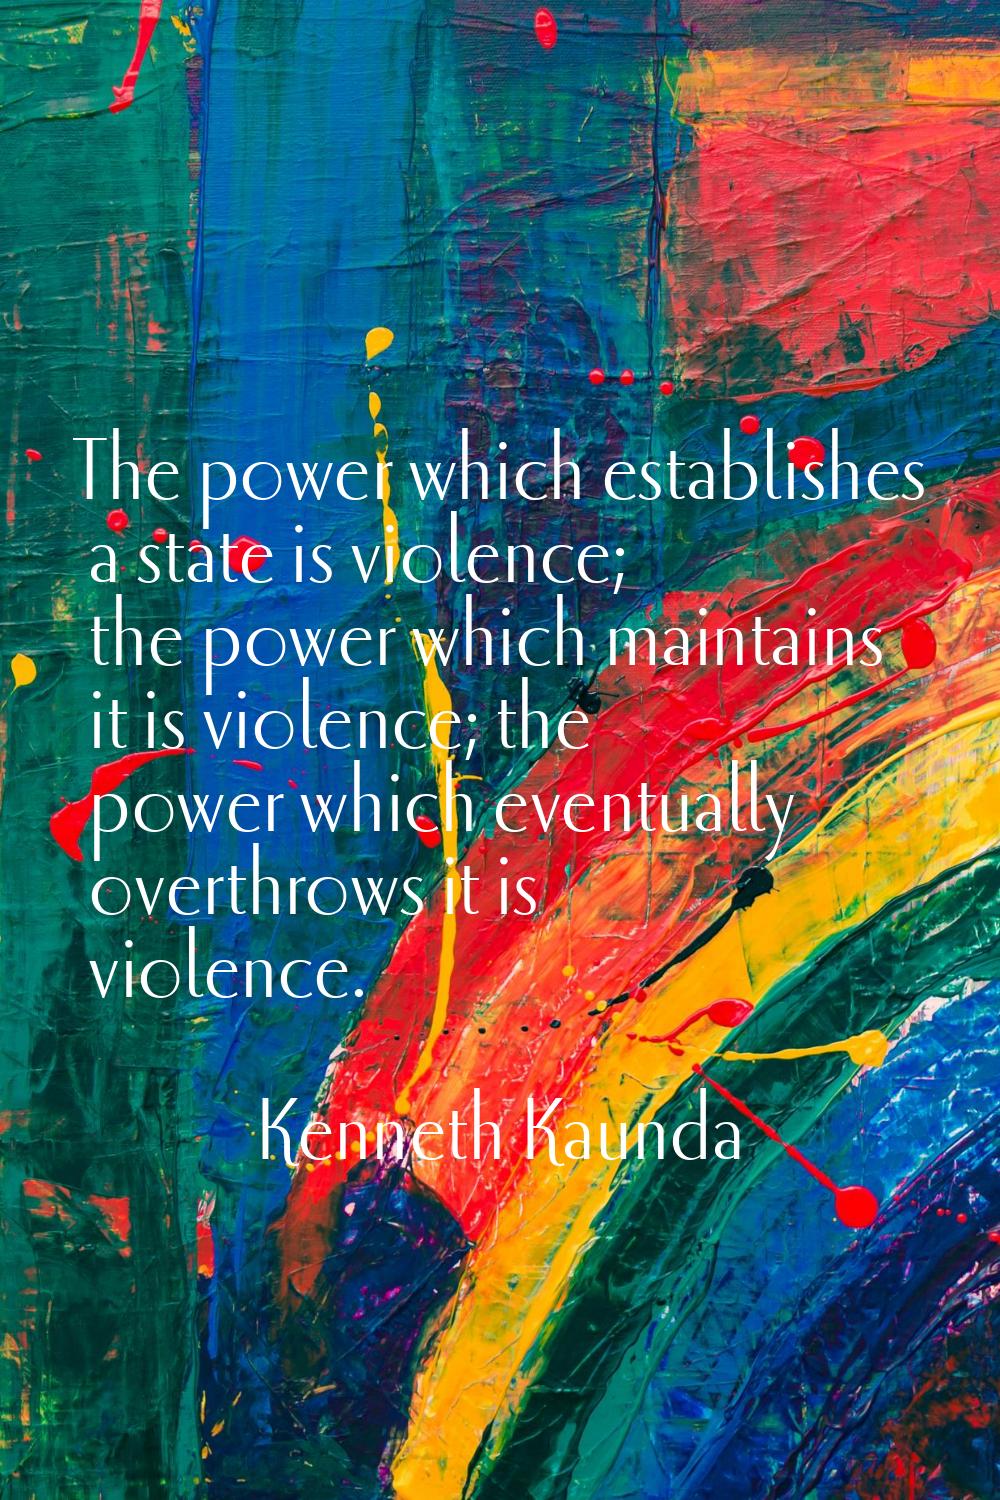 The power which establishes a state is violence; the power which maintains it is violence; the powe